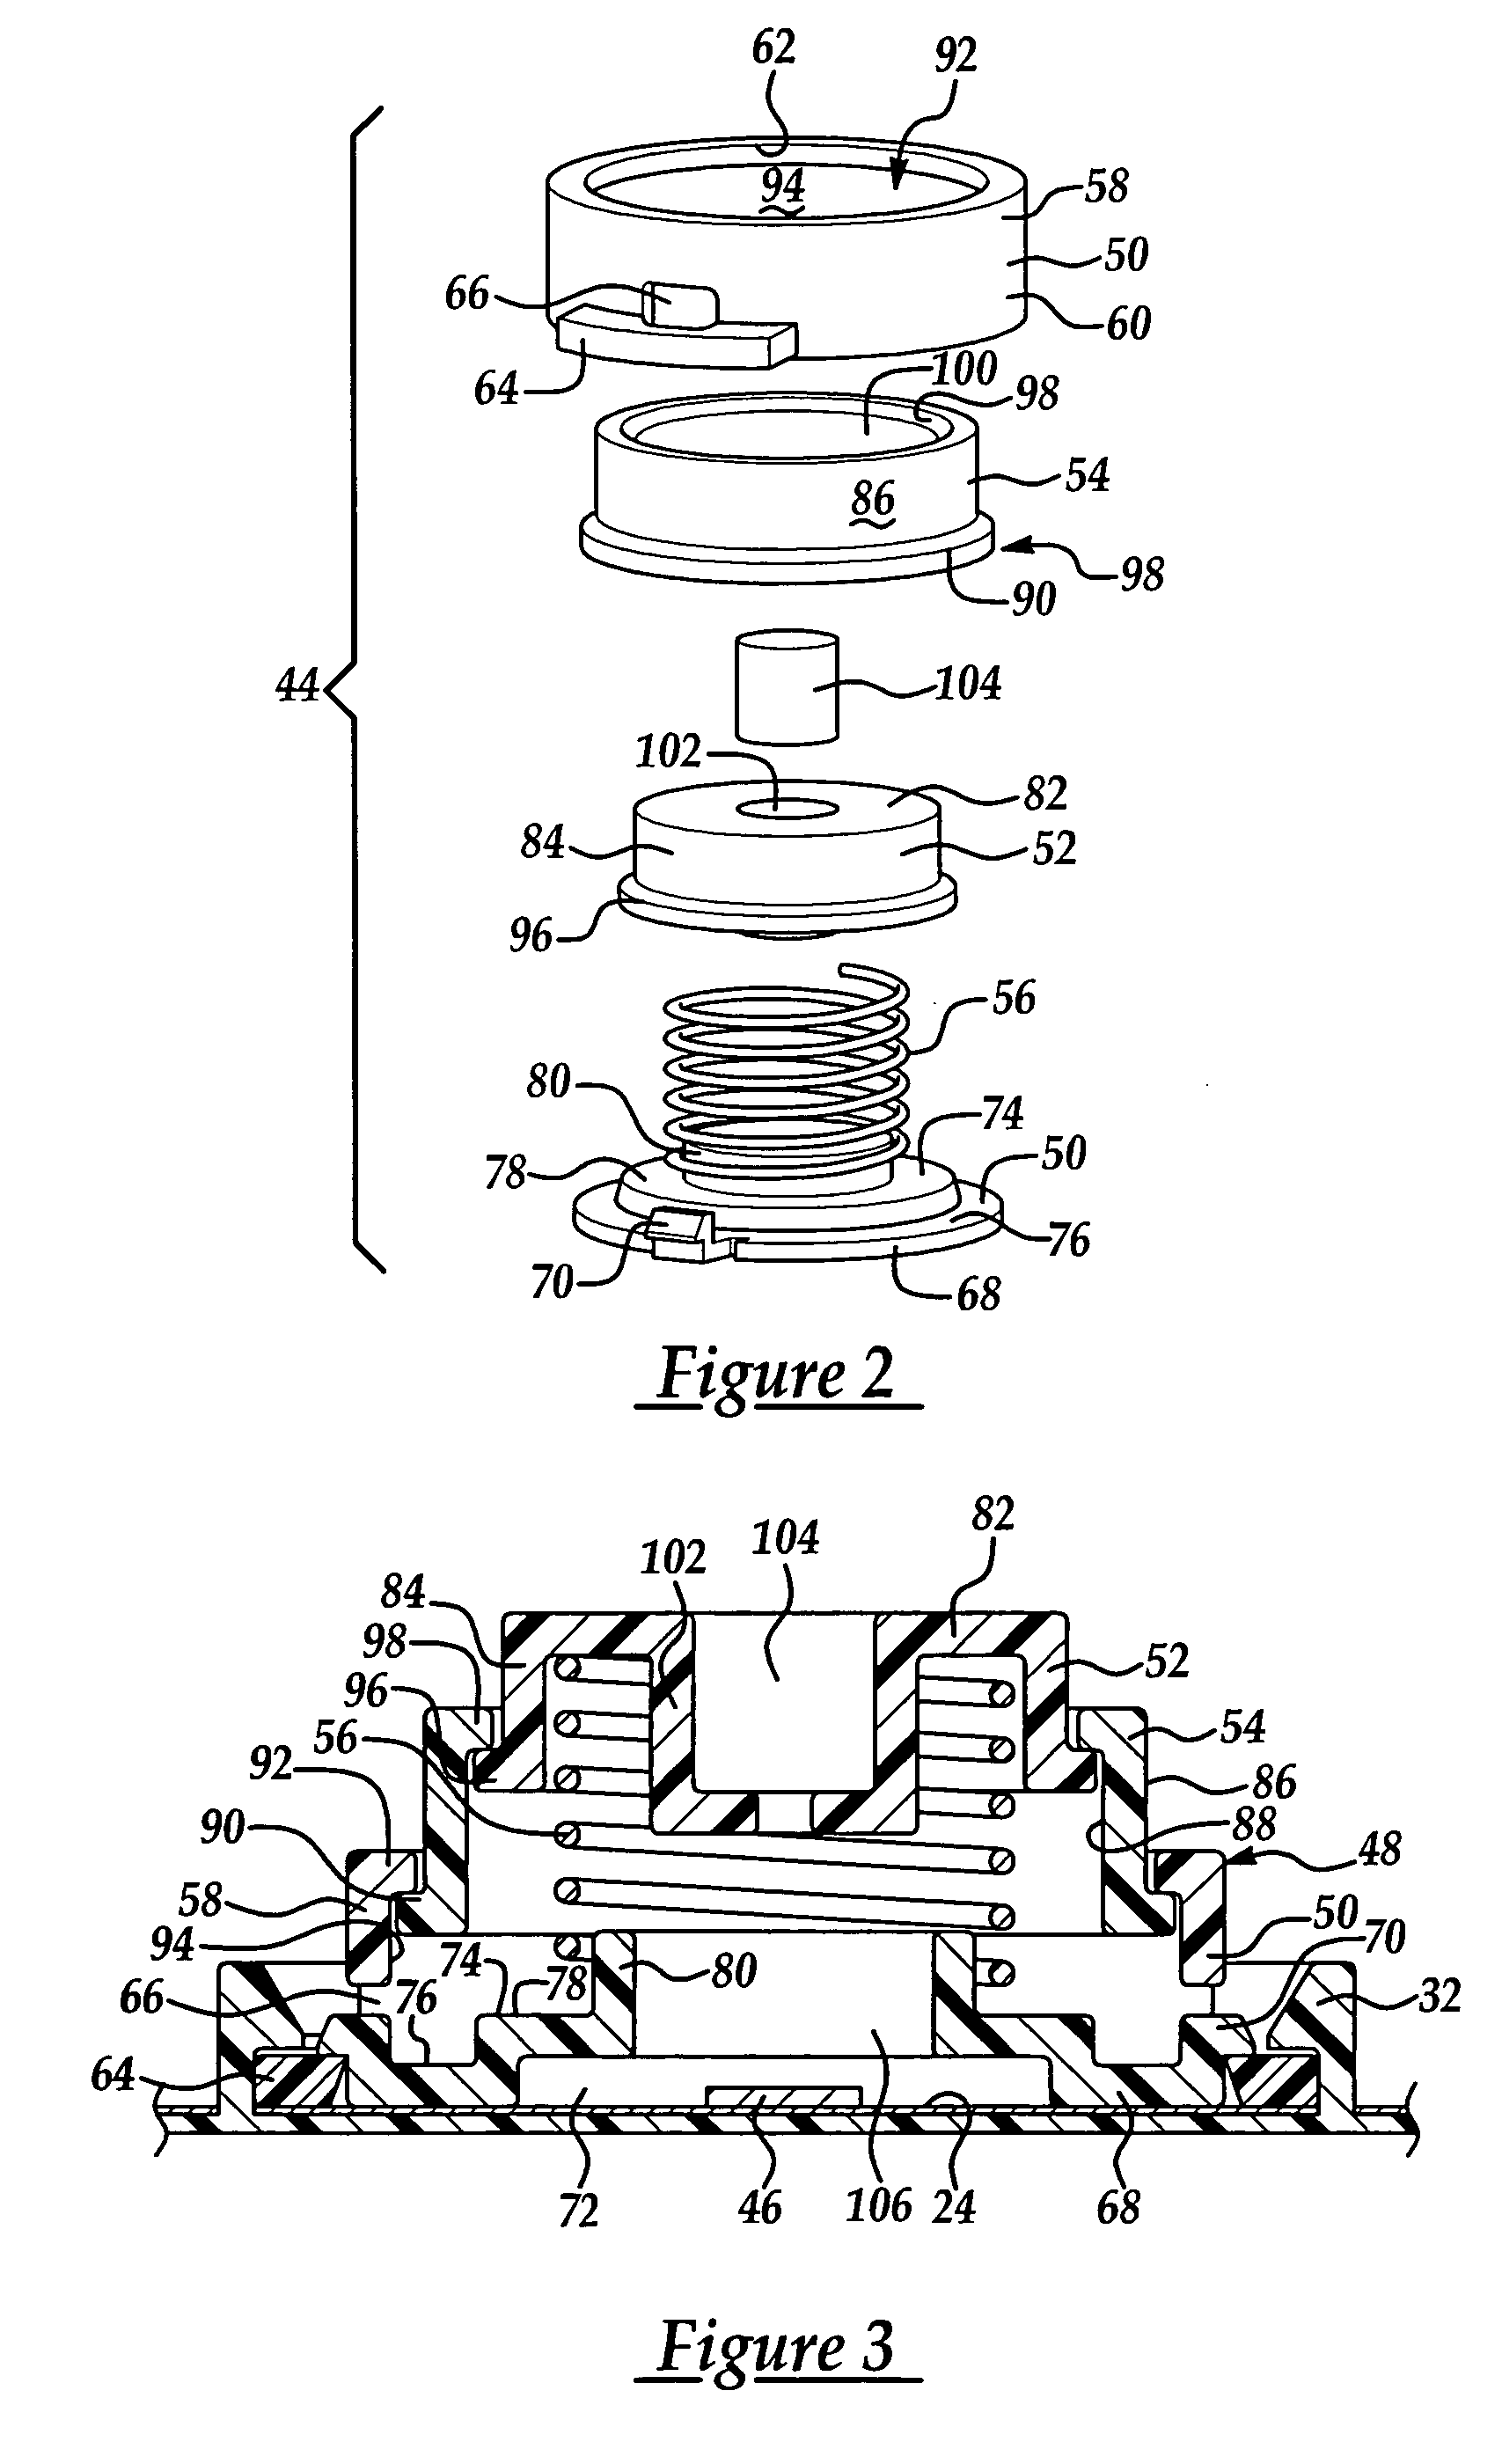 Vehicle occupant sensing system having an upper slide member with an emitter interference member